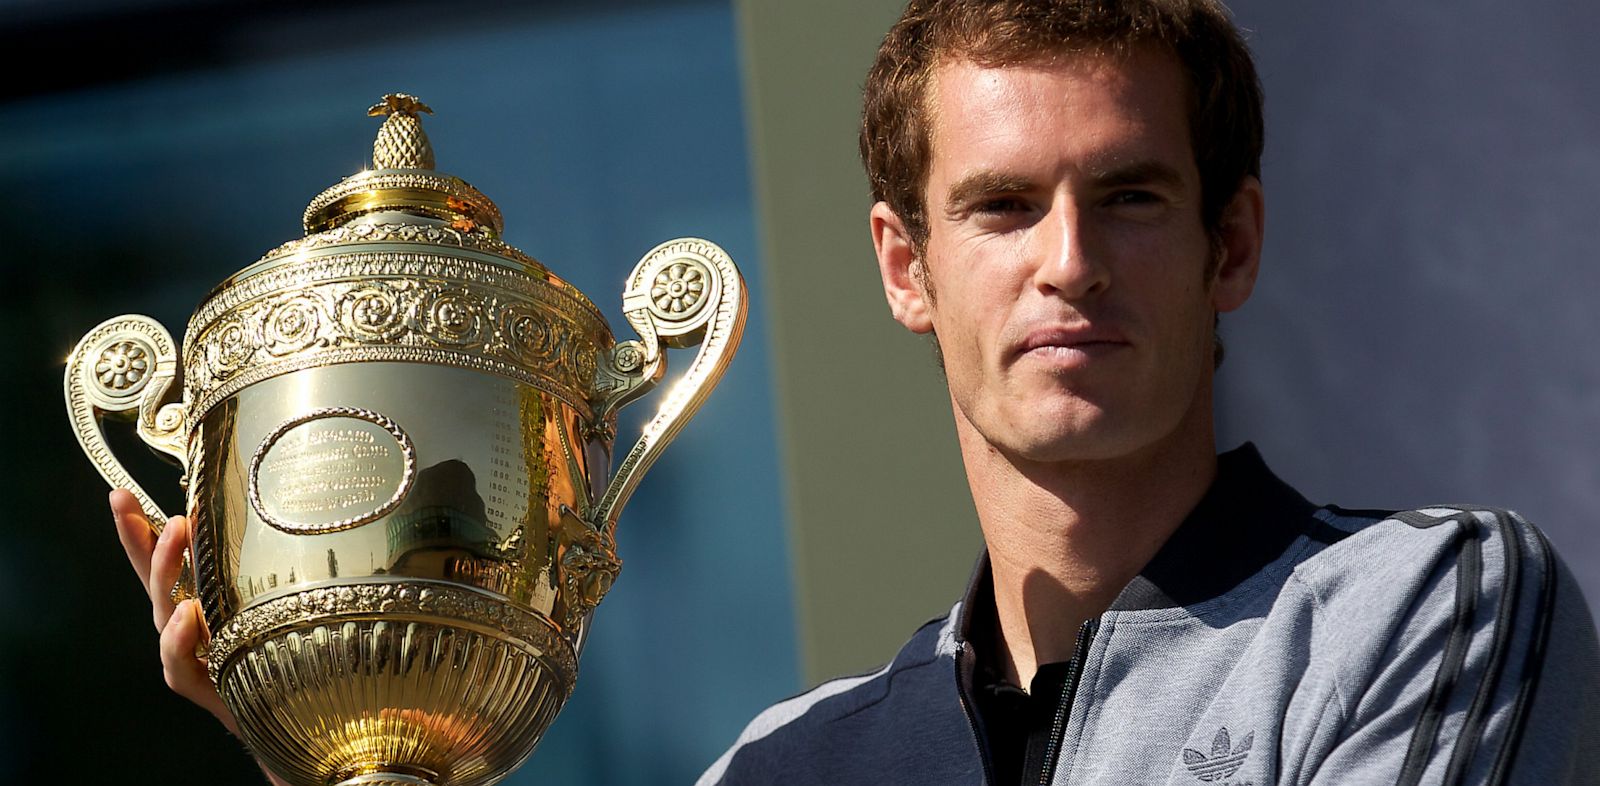 PHOTO: British tennis player Andy Murray poses with the 2013 Wimbledon trophy at the All England Club in Wimbledon, southwest London, on July 8, 2013.